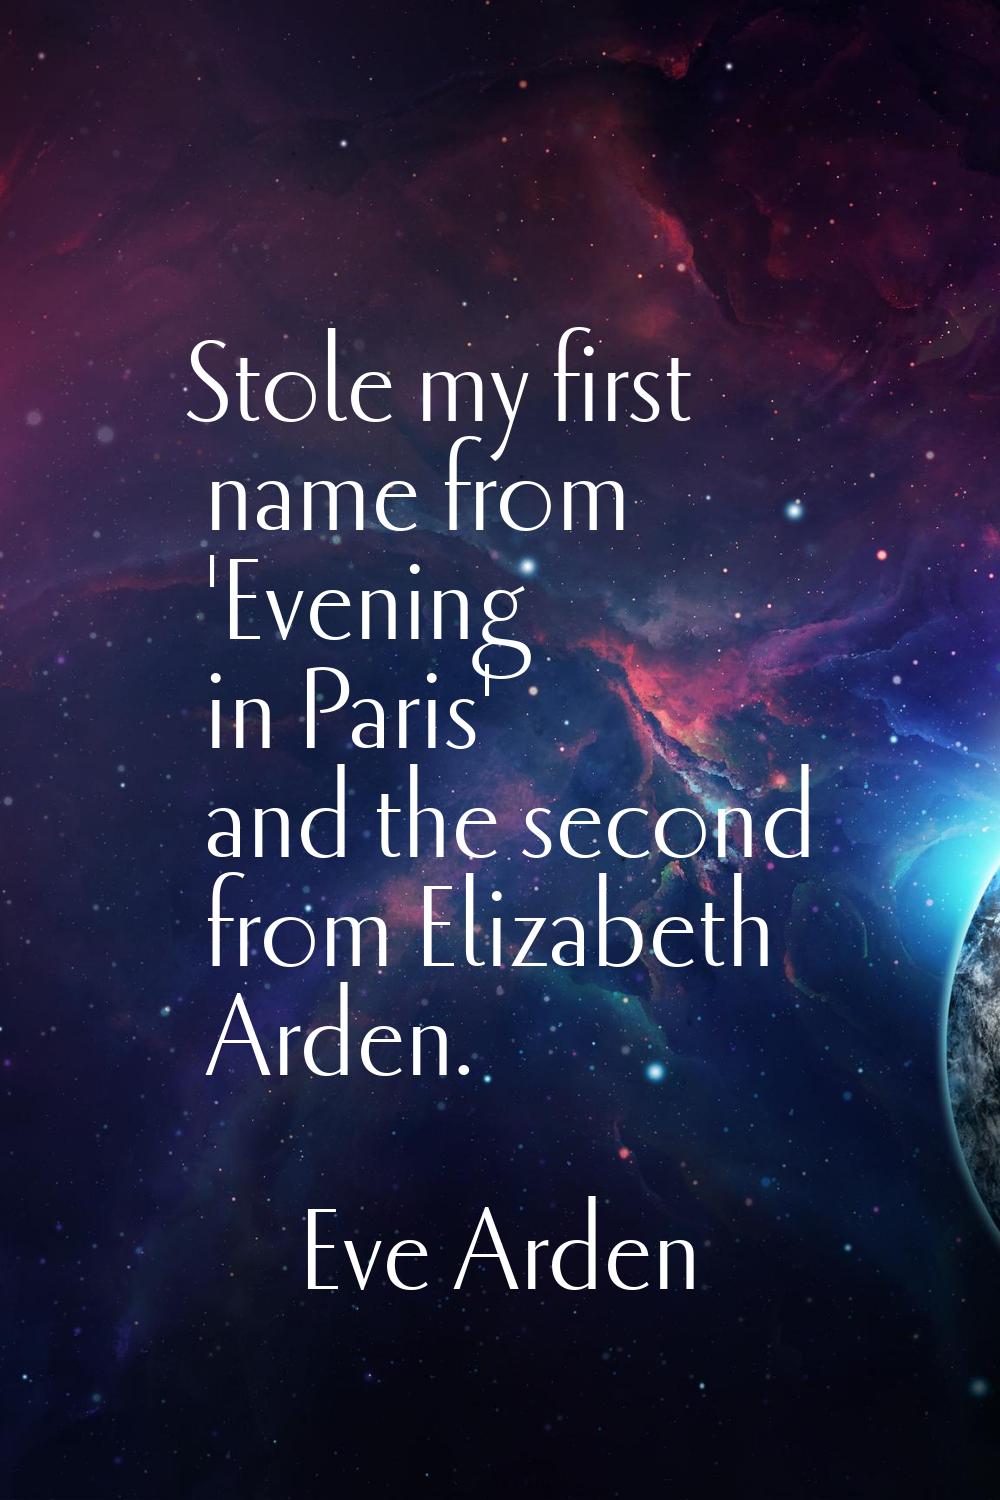 Stole my first name from 'Evening in Paris' and the second from Elizabeth Arden.